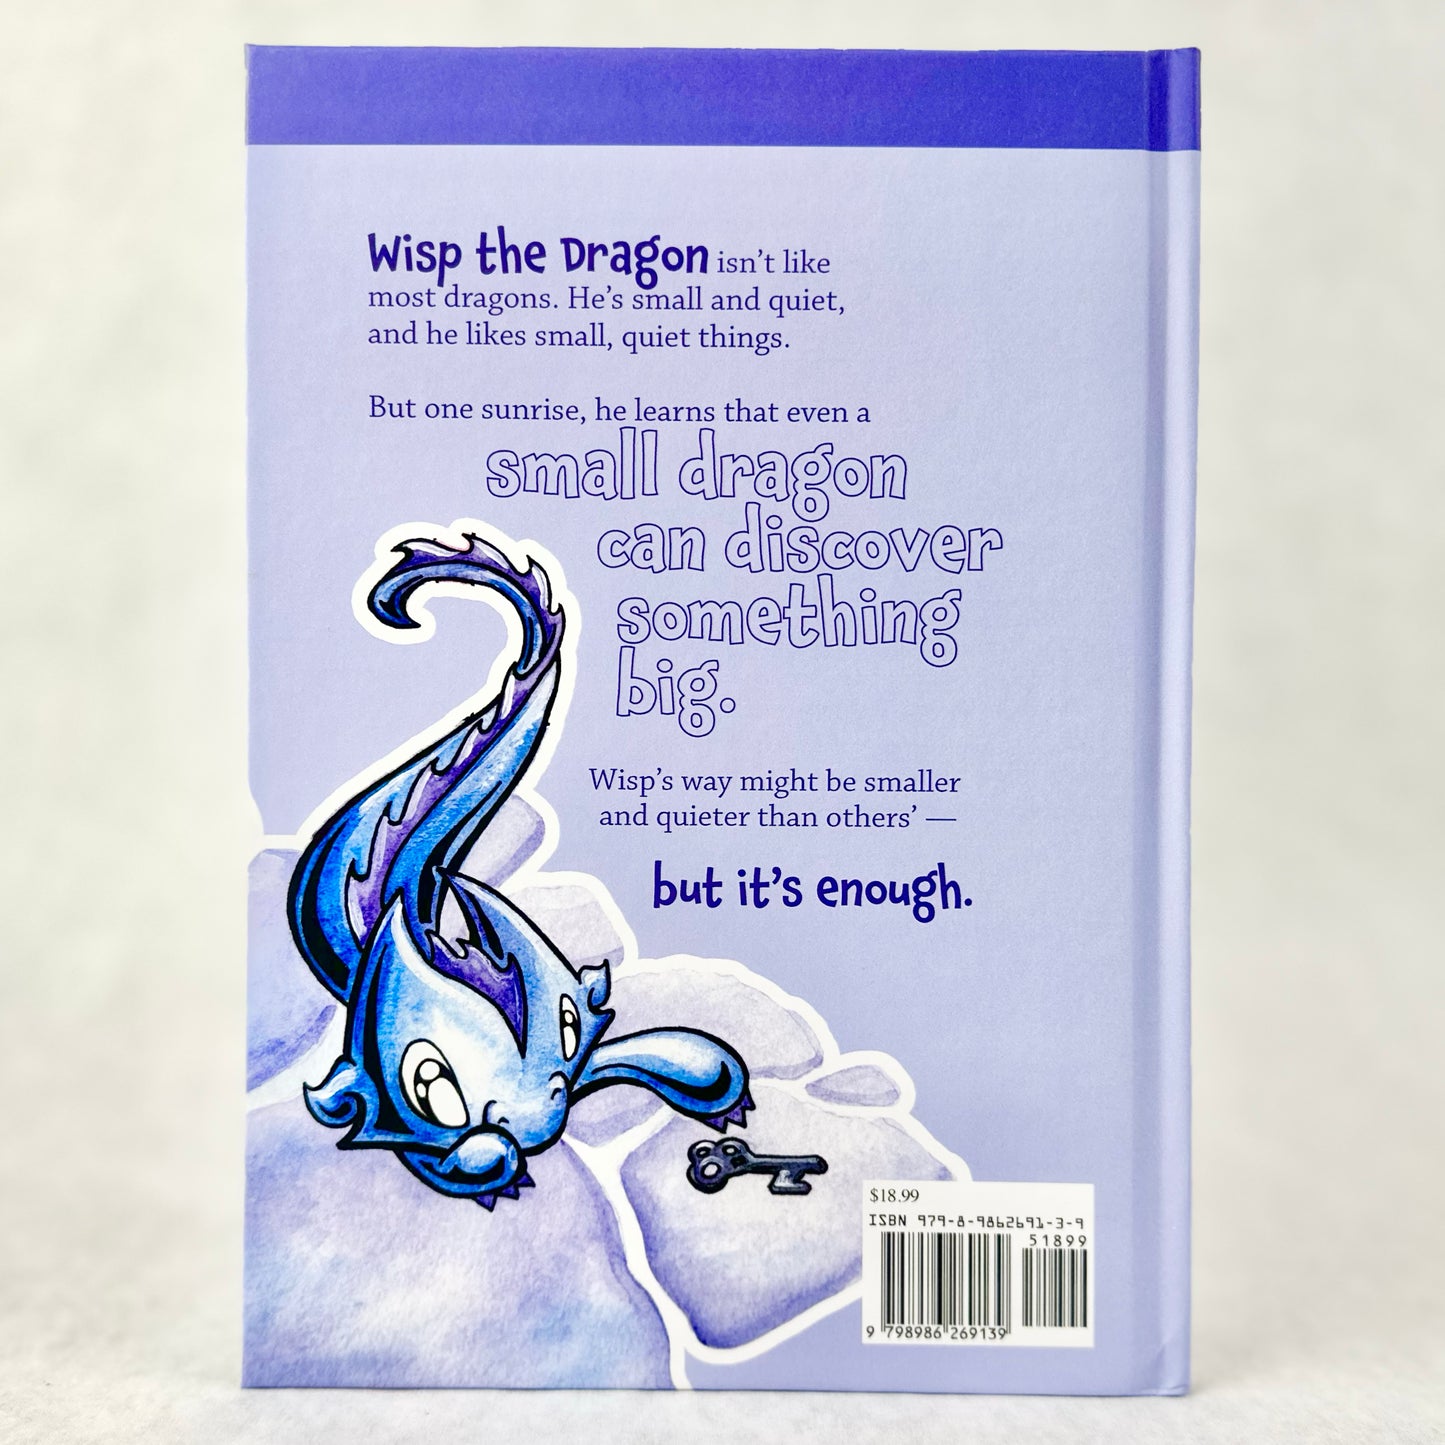 Book 3: "Just a Small Dragon" (signed)